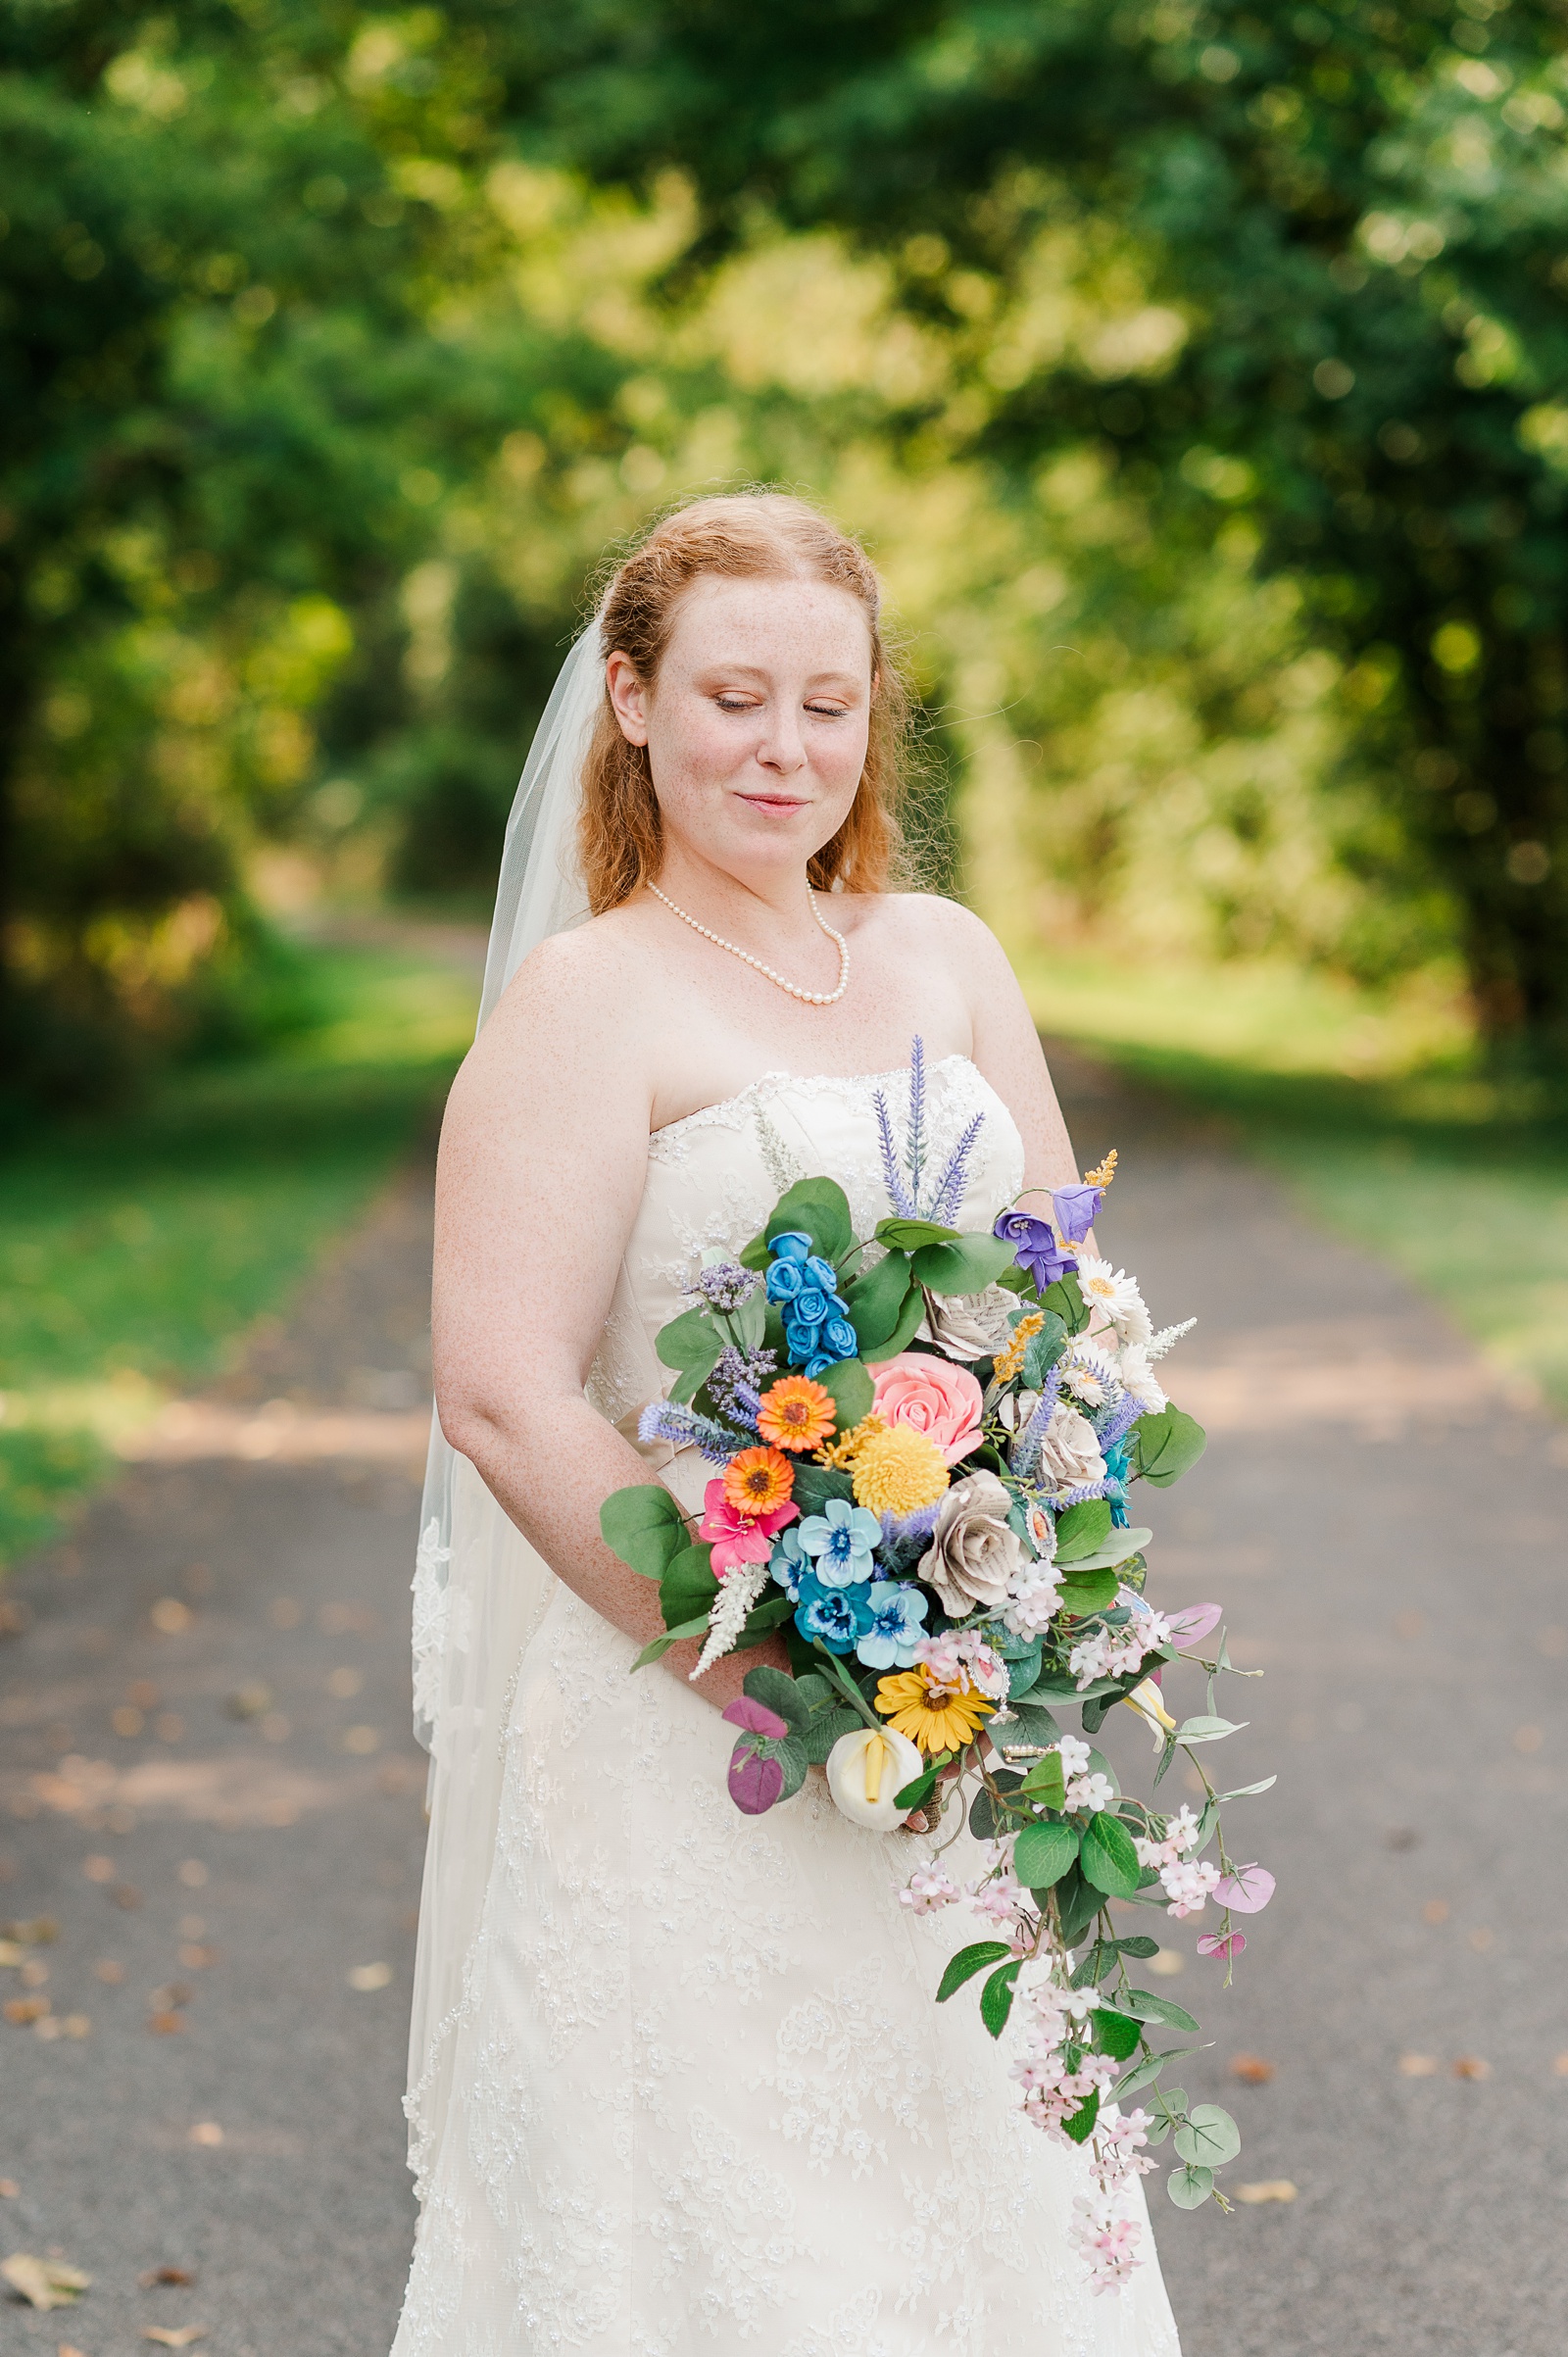 Fairytale Inspired Intimate Ceremony Bridal Portraits. Virginia Intimate Wedding Photographer Kailey Brianne Photography. 